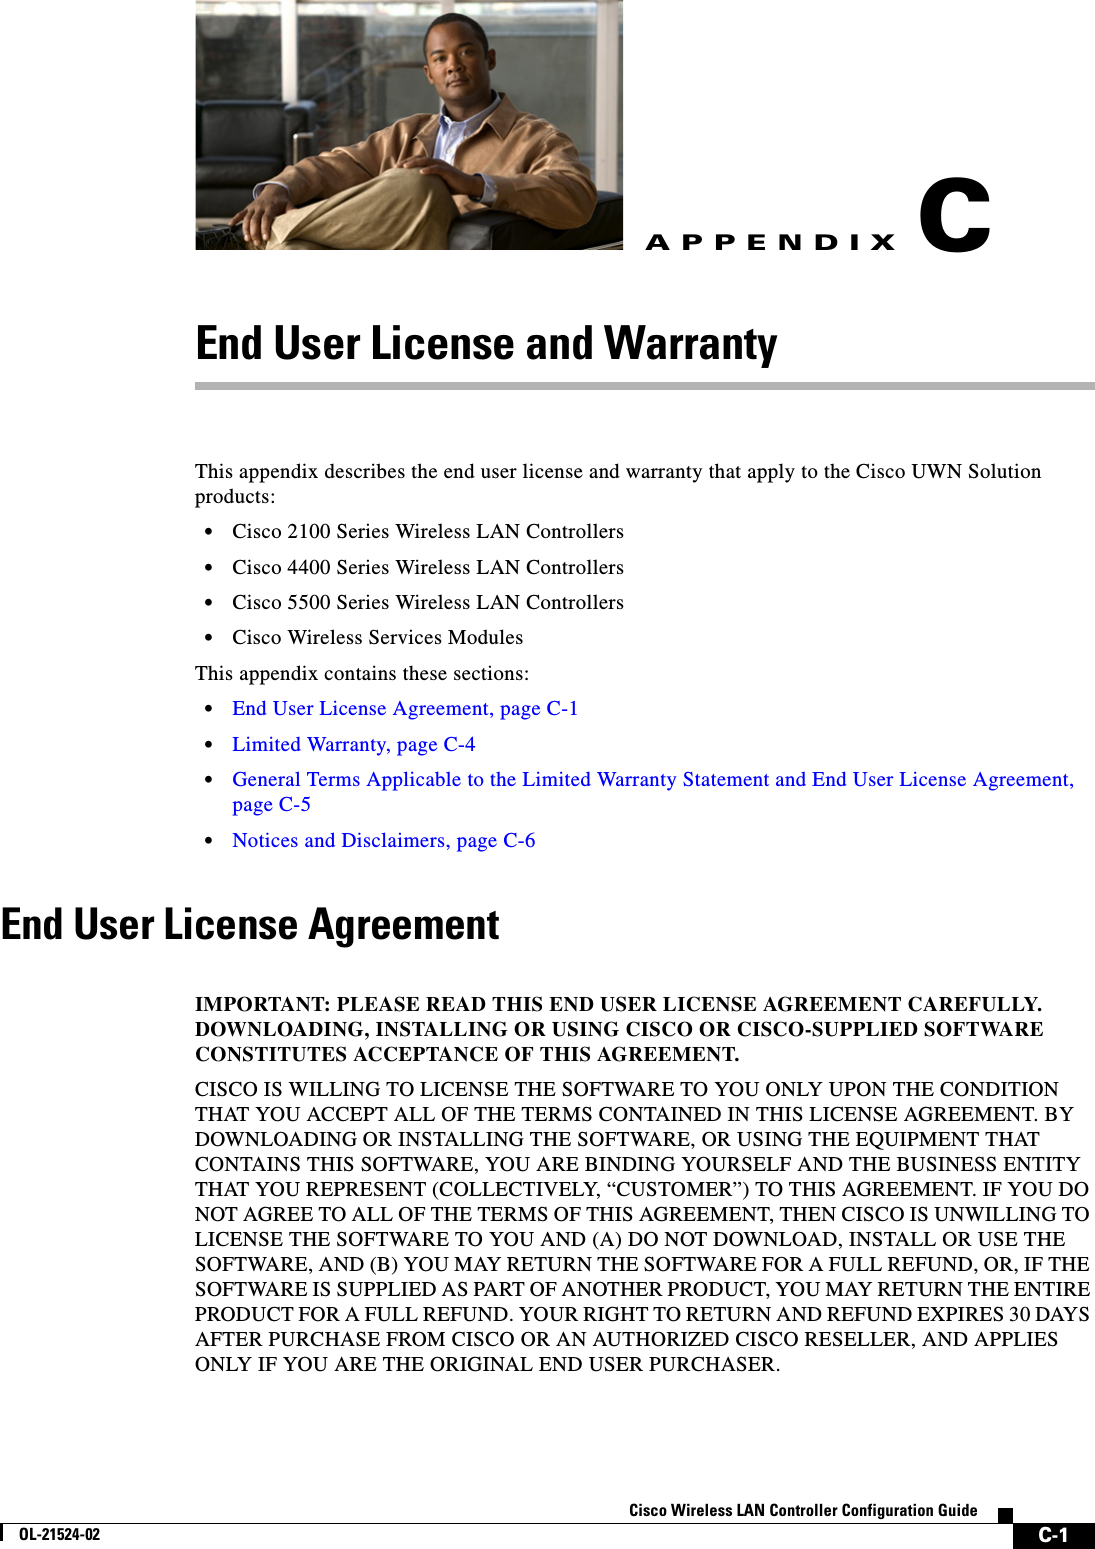  C-1Cisco Wireless LAN Controller Configuration GuideOL-21524-02APPENDIXCEnd User License and WarrantyThis appendix describes the end user license and warranty that apply to the Cisco UWN Solution products:  • Cisco 2100 Series Wireless LAN Controllers  • Cisco 4400 Series Wireless LAN Controllers  • Cisco 5500 Series Wireless LAN Controllers  • Cisco Wireless Services ModulesThis appendix contains these sections:  • End User License Agreement, page C-1  • Limited Warranty, page C-4  • General Terms Applicable to the Limited Warranty Statement and End User License Agreement, page C-5  • Notices and Disclaimers, page C-6End User License AgreementEnd User License AgreementIMPORTANT: PLEASE READ THIS END USER LICENSE AGREEMENT CAREFULLY. DOWNLOADING, INSTALLING OR USING CISCO OR CISCO-SUPPLIED SOFTWARE CONSTITUTES ACCEPTANCE OF THIS AGREEMENT. CISCO IS WILLING TO LICENSE THE SOFTWARE TO YOU ONLY UPON THE CONDITION THAT YOU ACCEPT ALL OF THE TERMS CONTAINED IN THIS LICENSE AGREEMENT. BY DOWNLOADING OR INSTALLING THE SOFTWARE, OR USING THE EQUIPMENT THAT CONTAINS THIS SOFTWARE, YOU ARE BINDING YOURSELF AND THE BUSINESS ENTITY THAT YOU REPRESENT (COLLECTIVELY, “CUSTOMER”) TO THIS AGREEMENT. IF YOU DO NOT AGREE TO ALL OF THE TERMS OF THIS AGREEMENT, THEN CISCO IS UNWILLING TO LICENSE THE SOFTWARE TO YOU AND (A) DO NOT DOWNLOAD, INSTALL OR USE THE SOFTWARE, AND (B) YOU MAY RETURN THE SOFTWARE FOR A FULL REFUND, OR, IF THE SOFTWARE IS SUPPLIED AS PART OF ANOTHER PRODUCT, YOU MAY RETURN THE ENTIRE PRODUCT FOR A FULL REFUND. YOUR RIGHT TO RETURN AND REFUND EXPIRES 30 DAYS AFTER PURCHASE FROM CISCO OR AN AUTHORIZED CISCO RESELLER, AND APPLIES ONLY IF YOU ARE THE ORIGINAL END USER PURCHASER. 